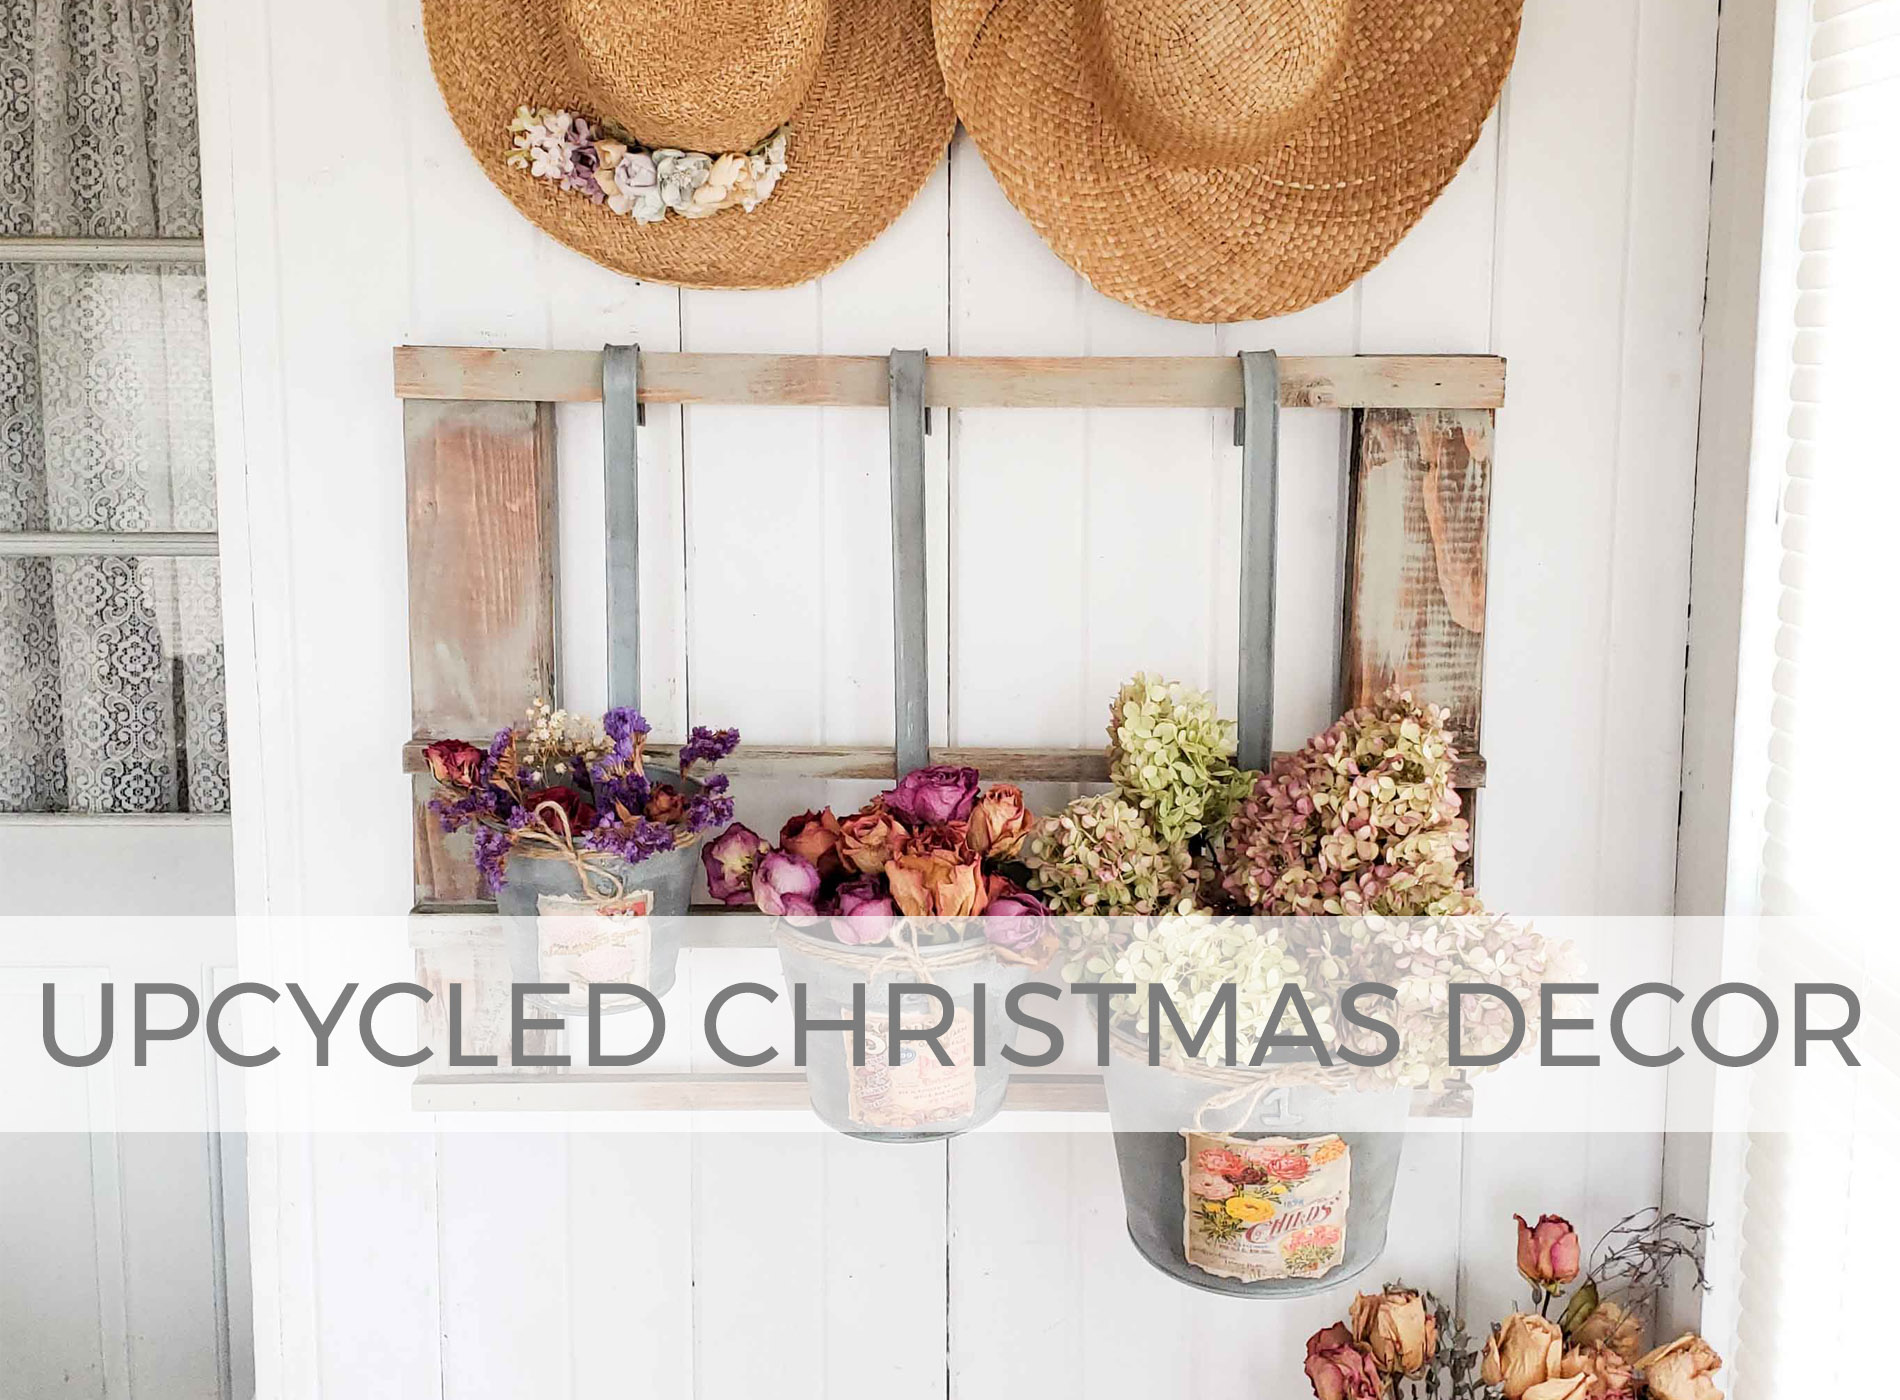 Upcycled Christmas Decor by Larissa of Prodigal Pieces | prodigalpieces.com #prodigalpieces